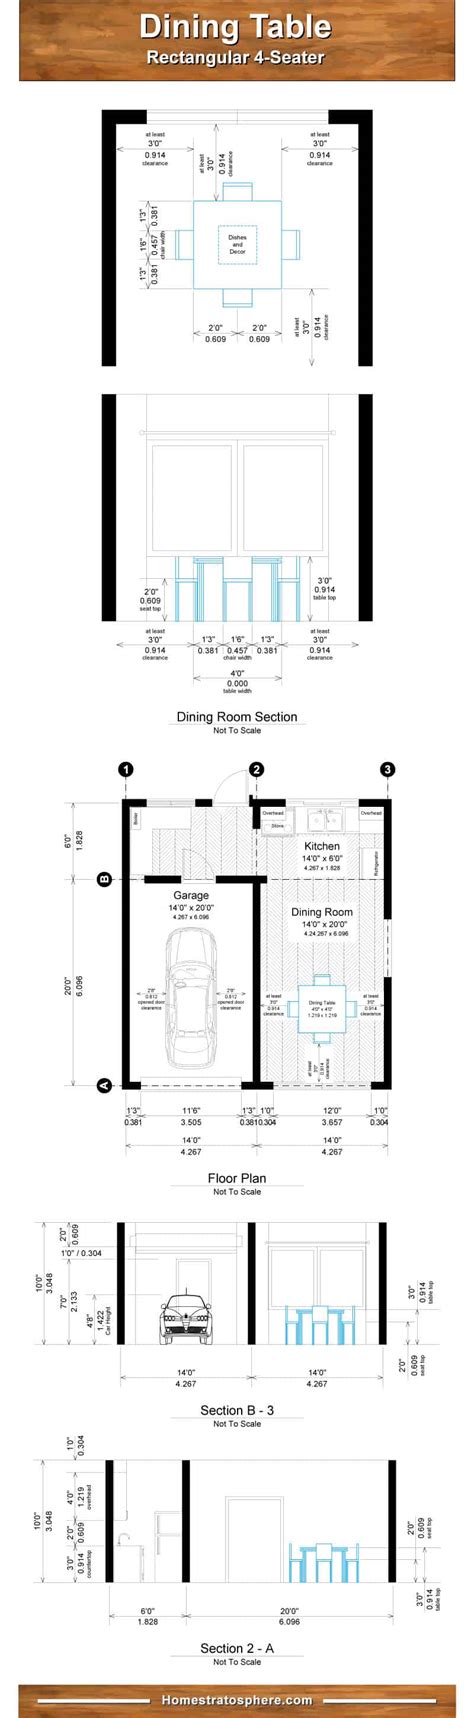 Proper Dining Room Table Dimensions For 4 6 8 10 And 12